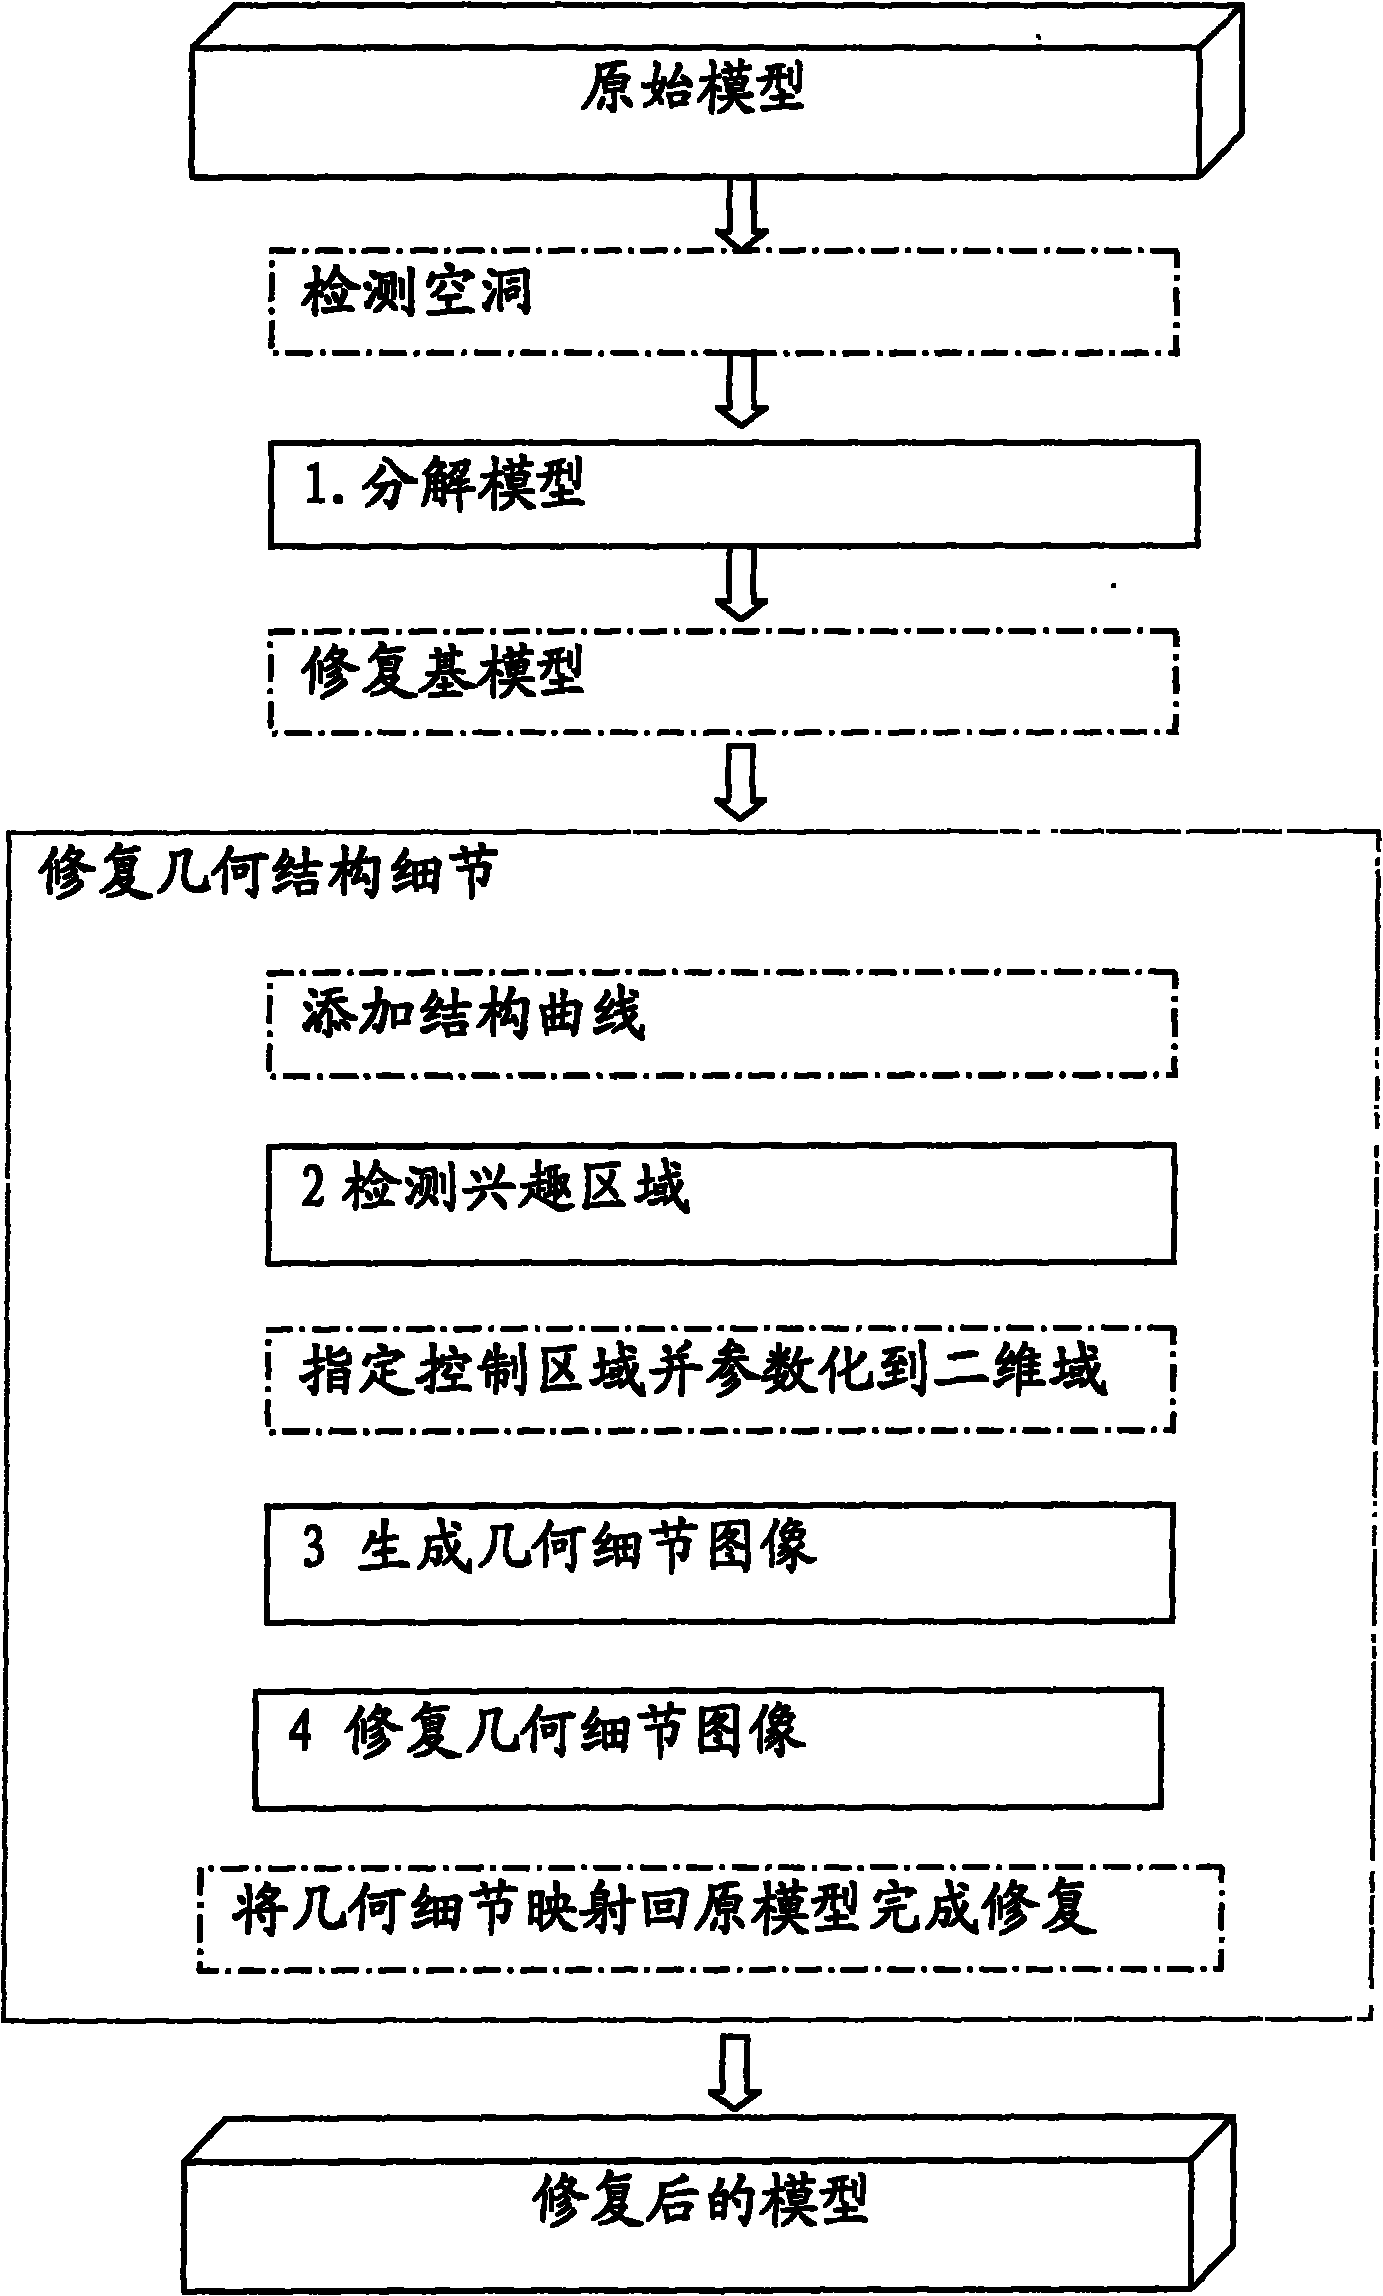 Method for repairing three-dimensional grid model based on global structure